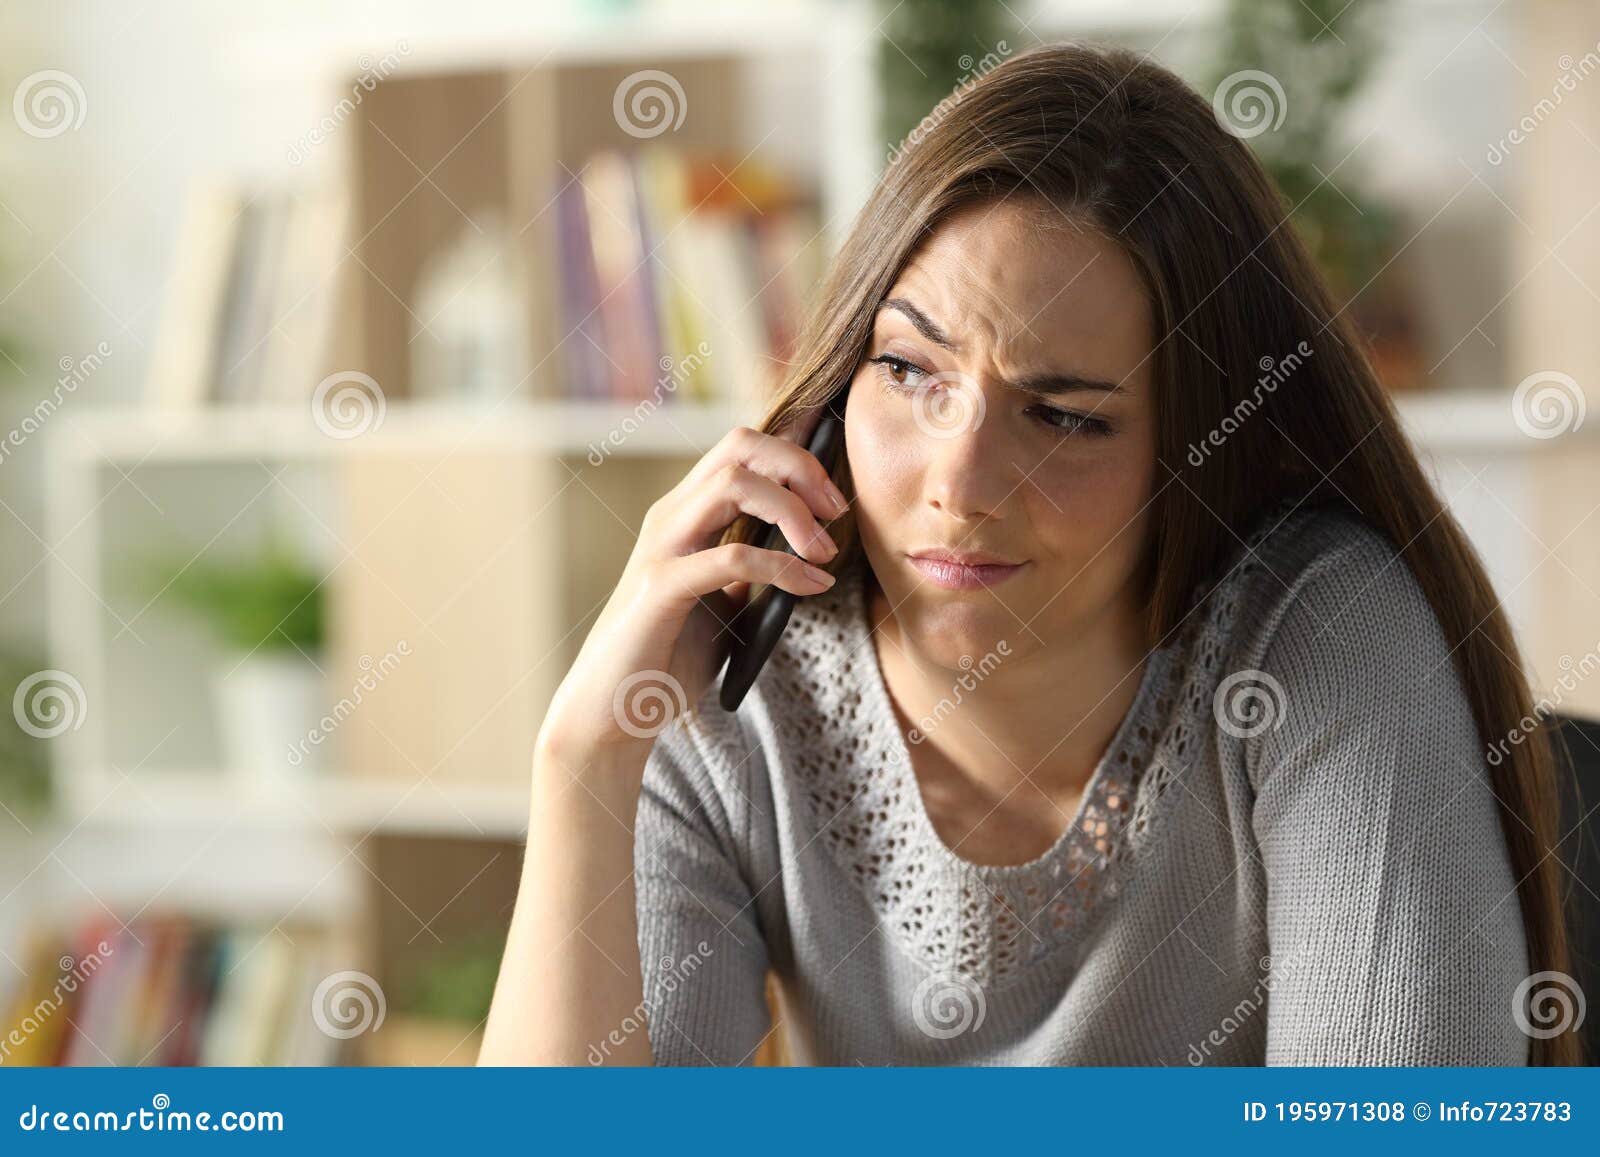 suspicious woman calling on phone sitting at home